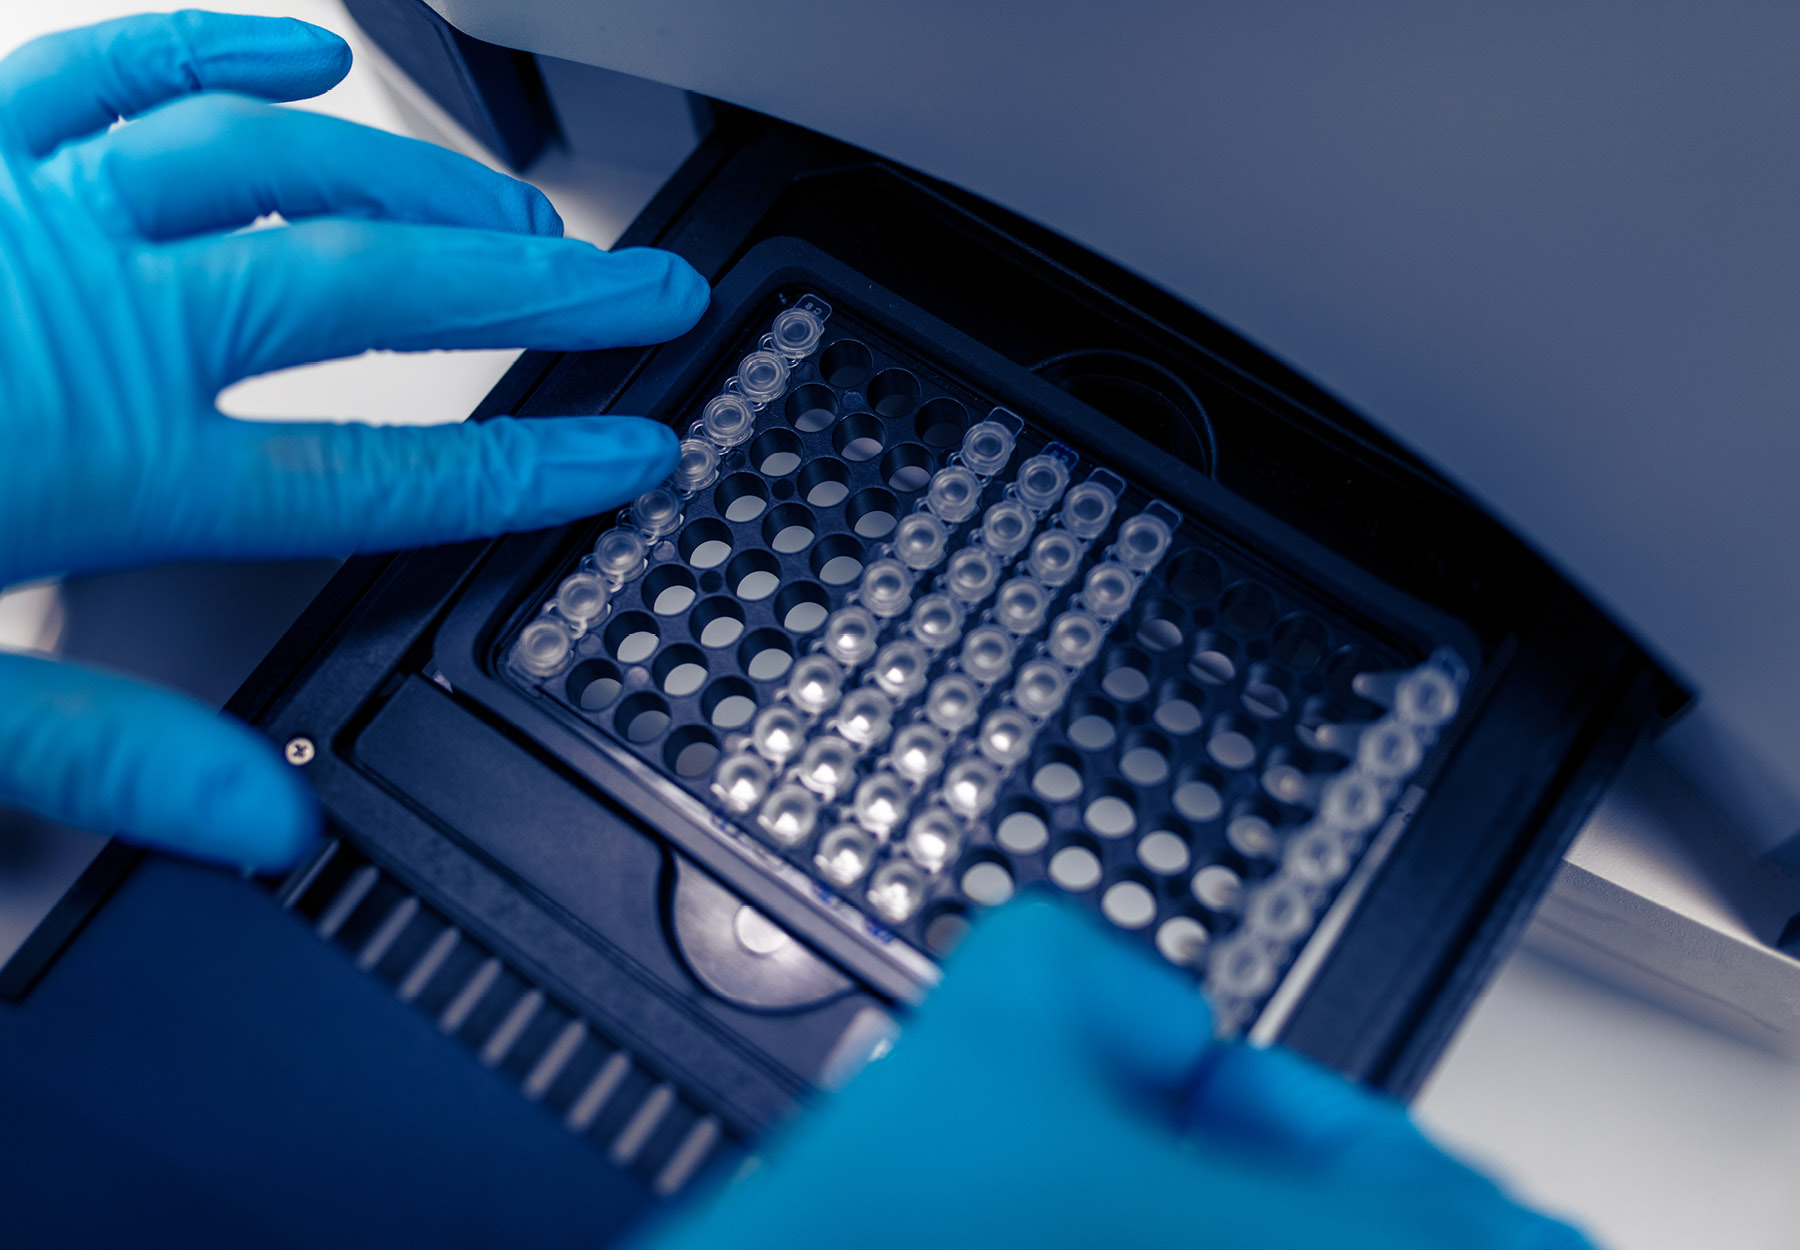 Scientist putting test 96 well plate into real-time PCR machine. iStock image.